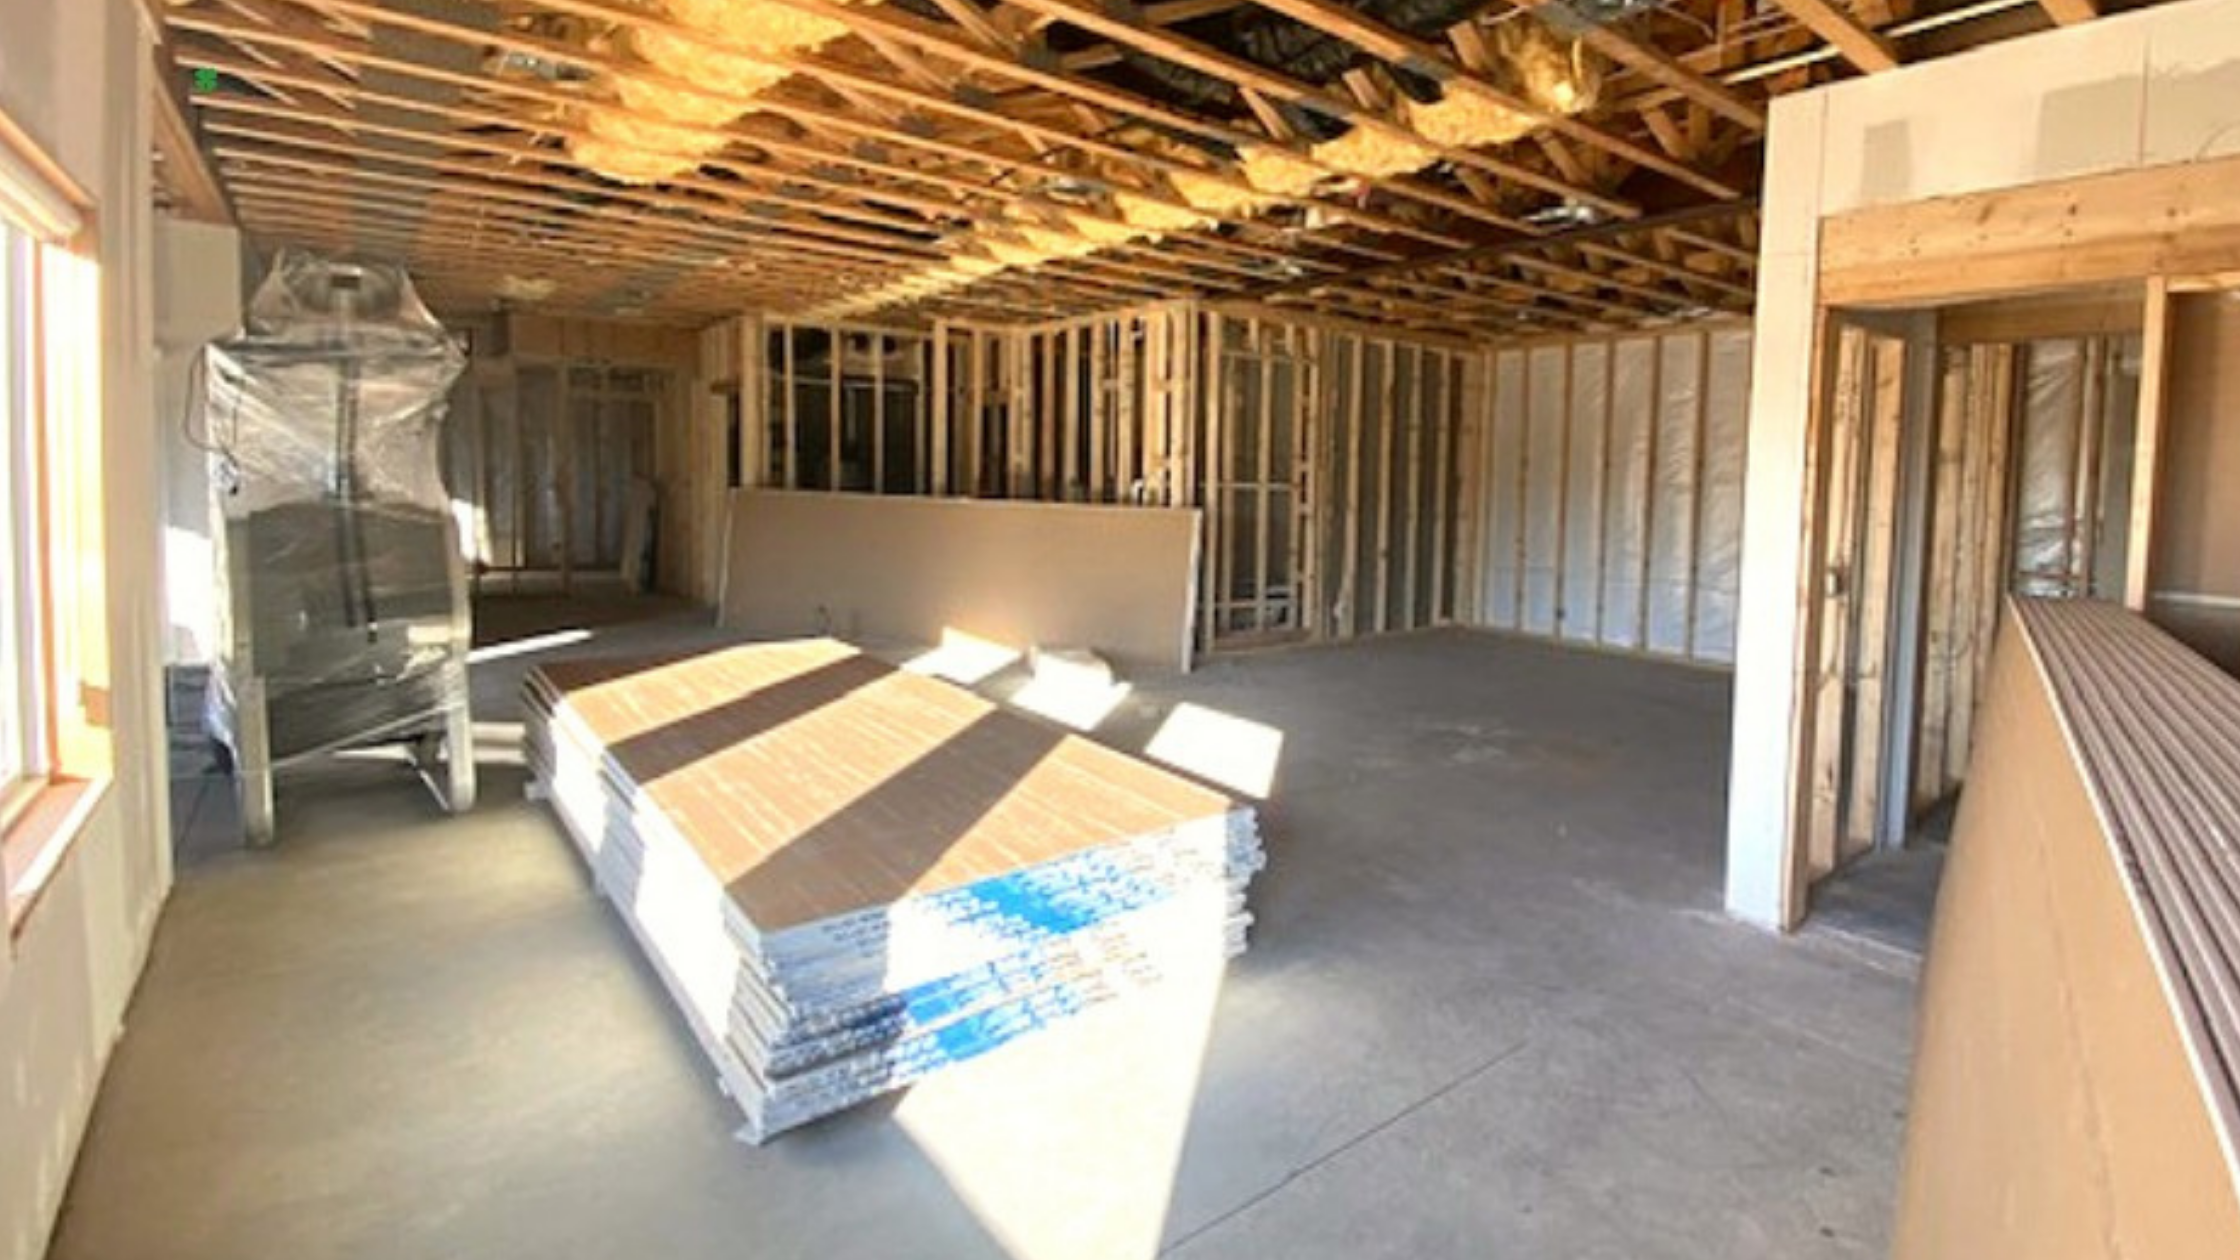 a unfinished basement being framed in with wood